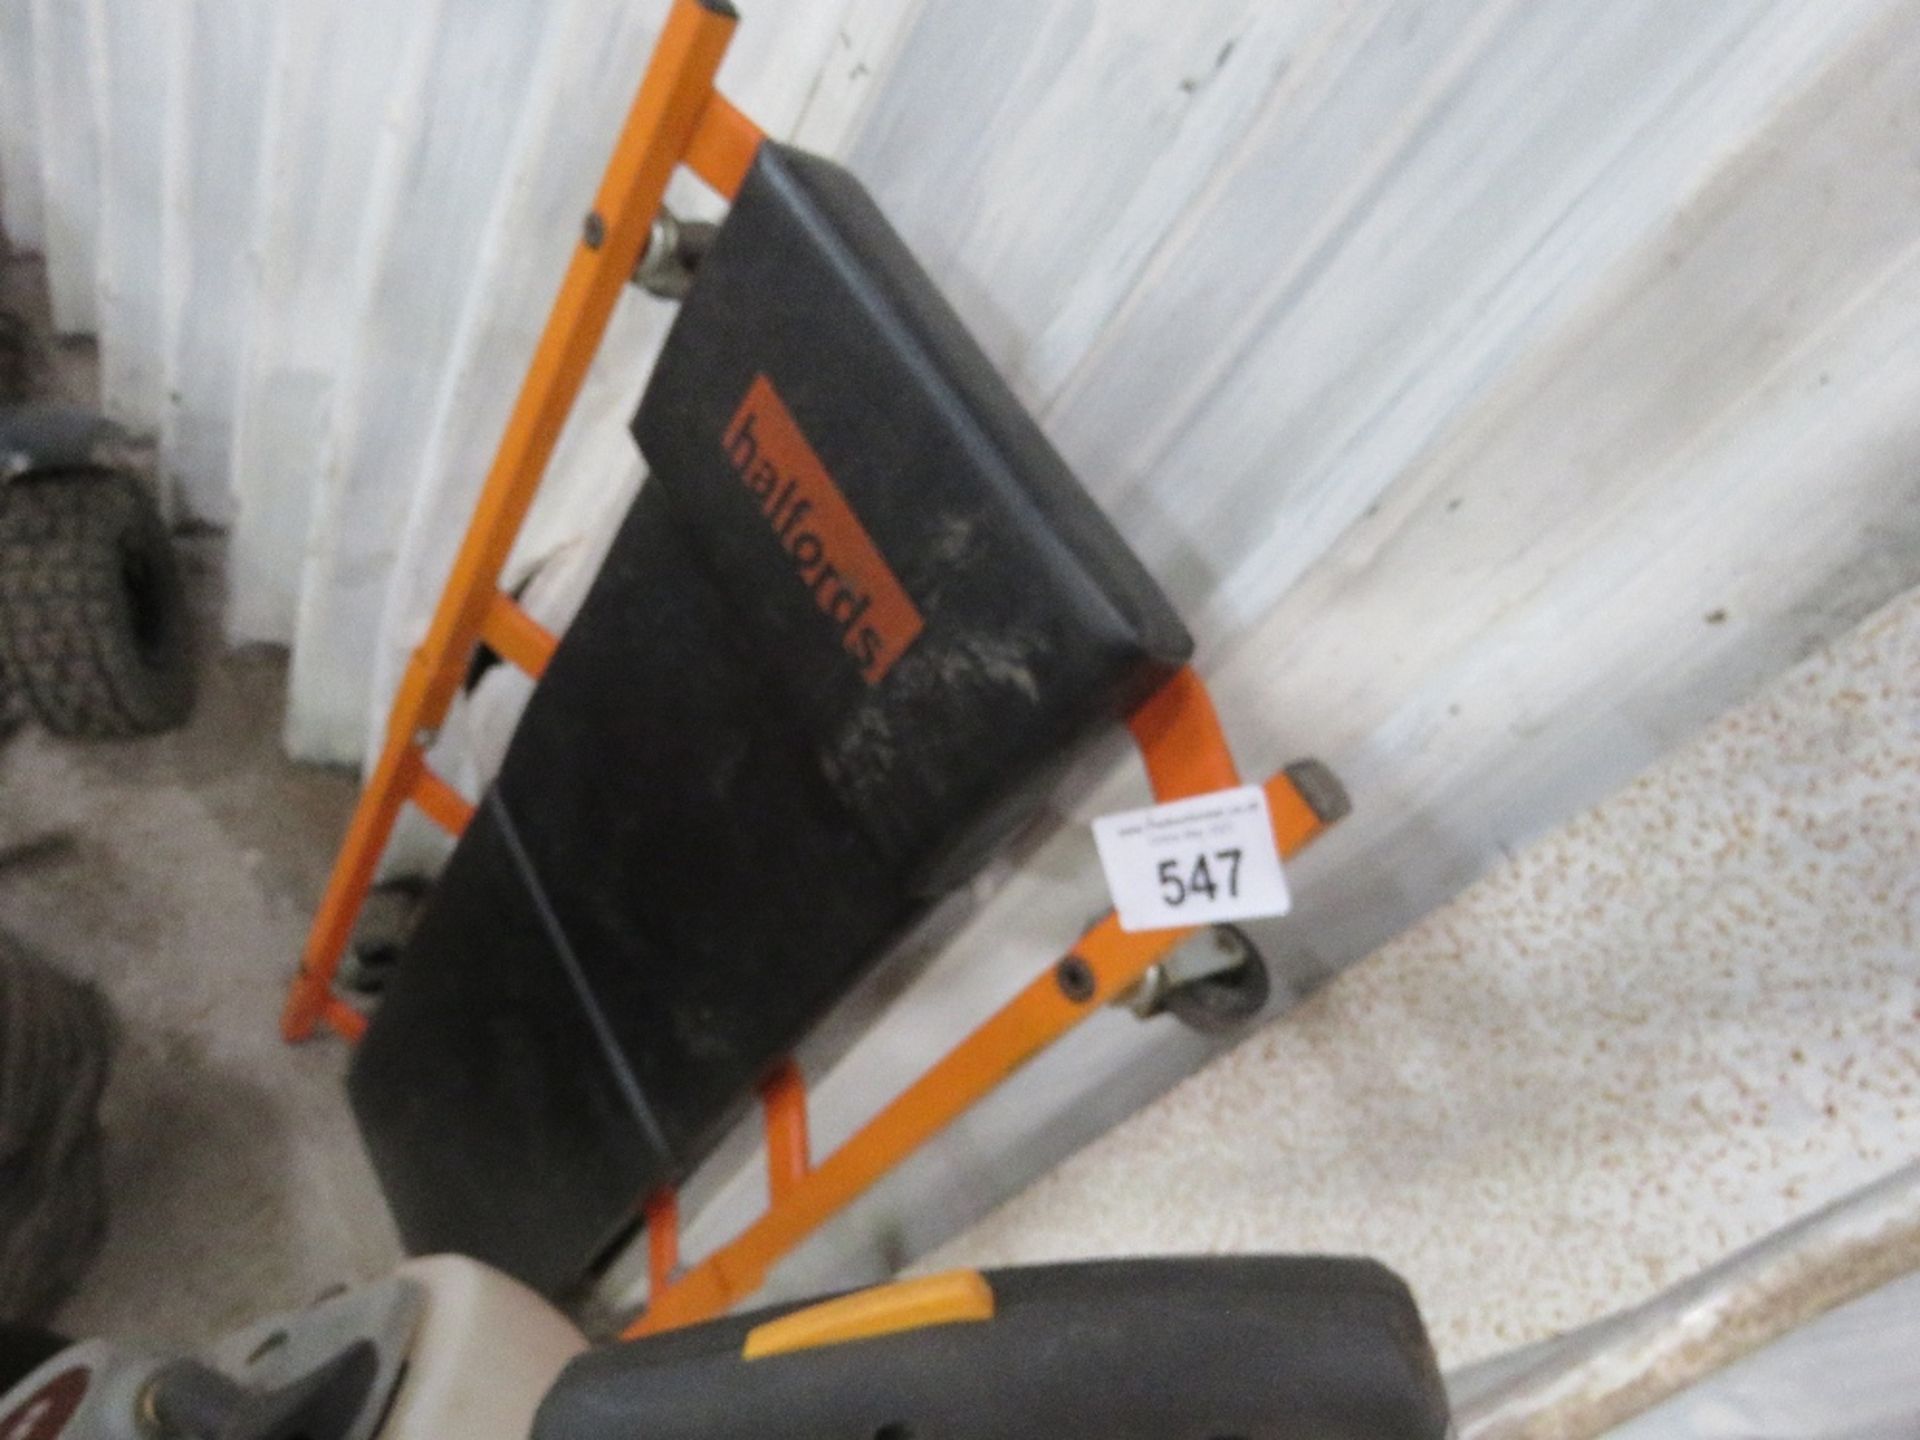 HALFORDS MECHANICS TROLLEY. THIS LOT IS SOLD UNDER THE AUCTIONEERS MARGIN SCHEME, THEREFORE NO VA - Image 2 of 2